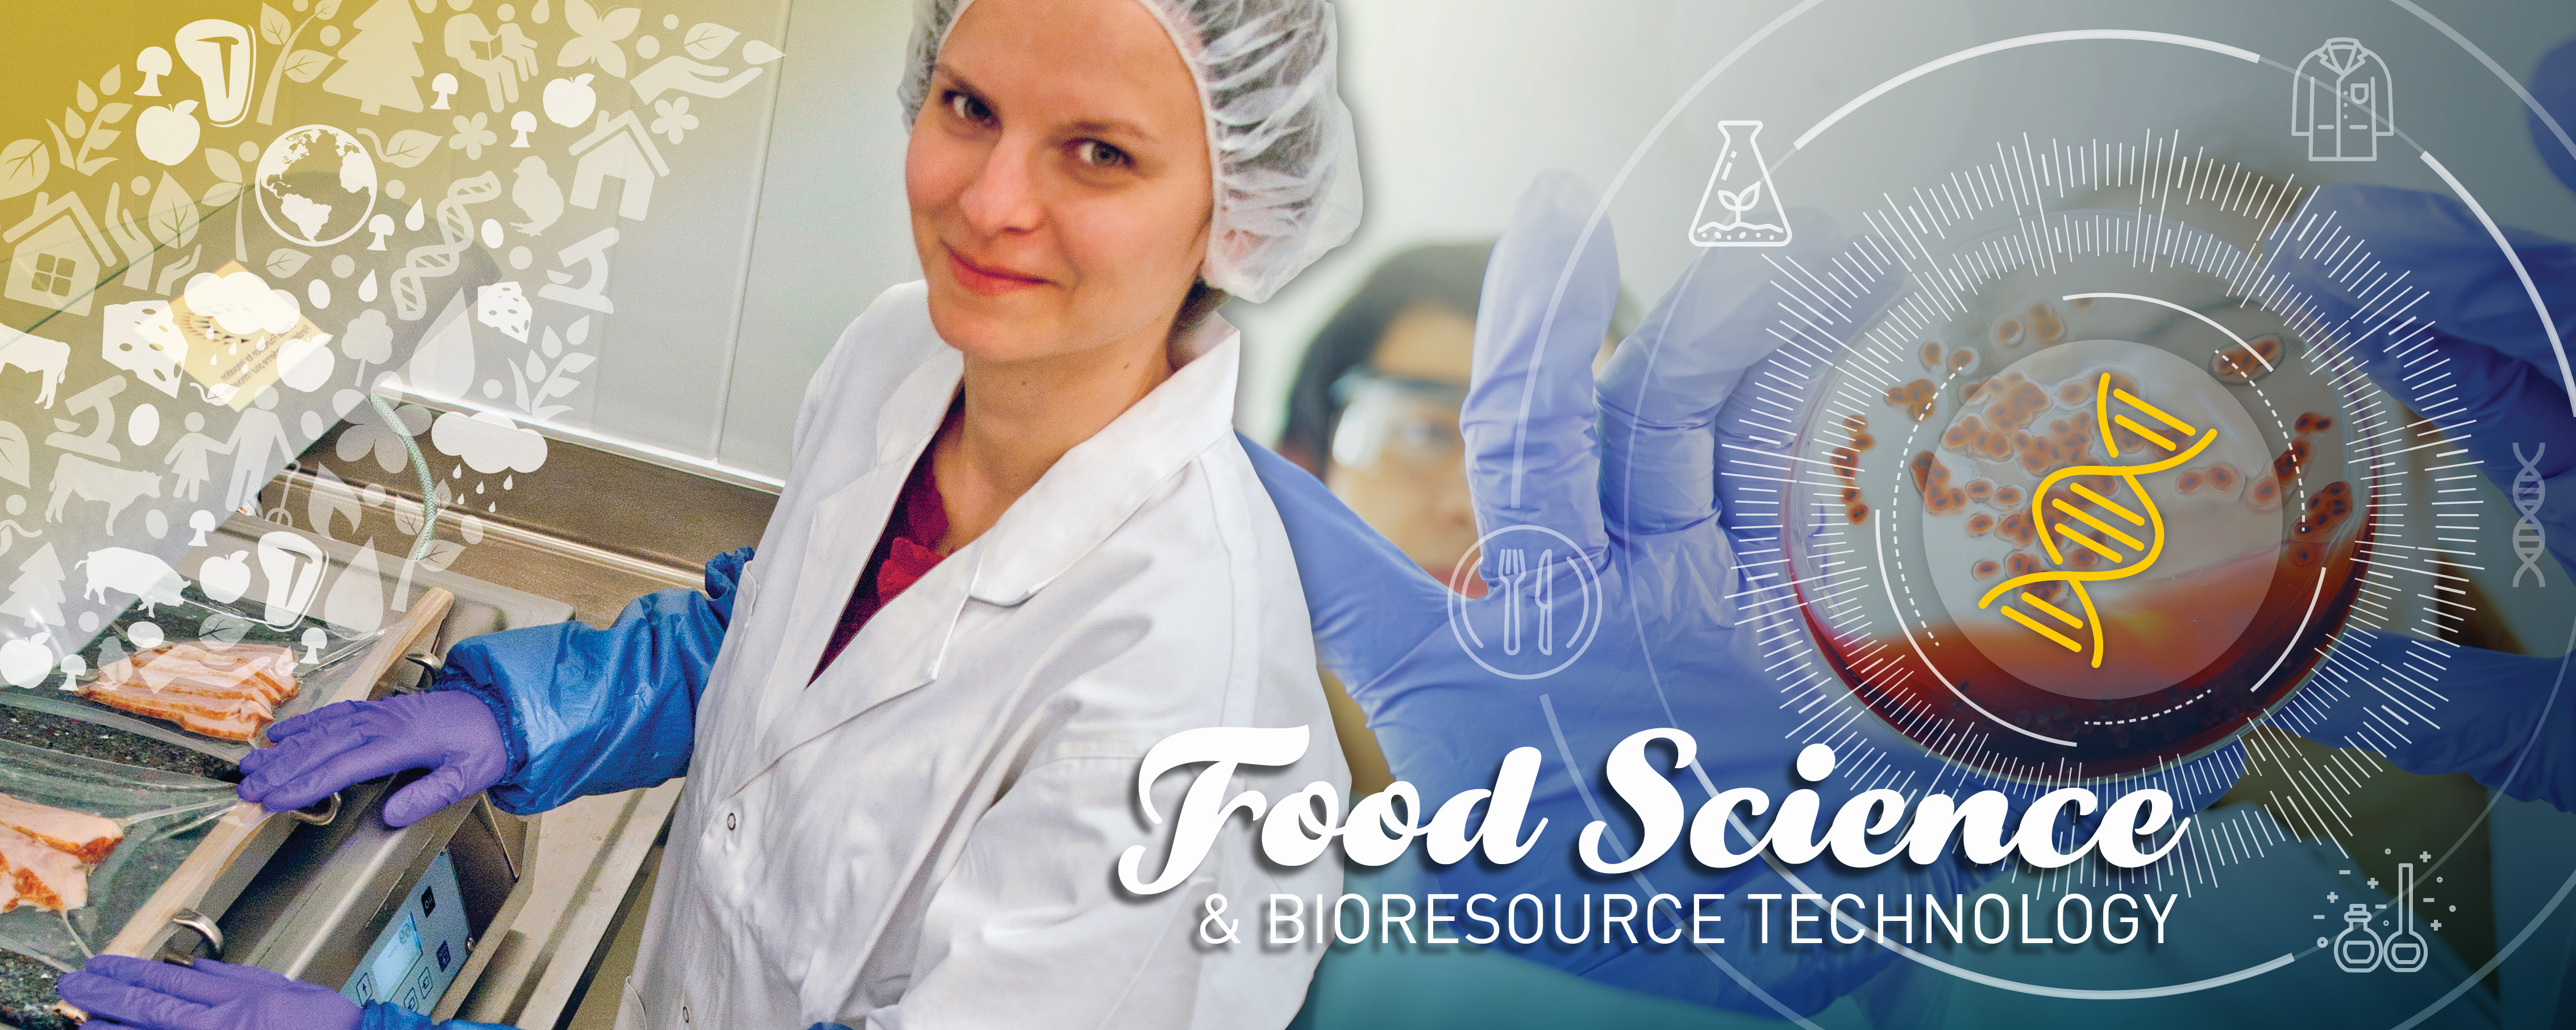 introduction to food science parker ebooking